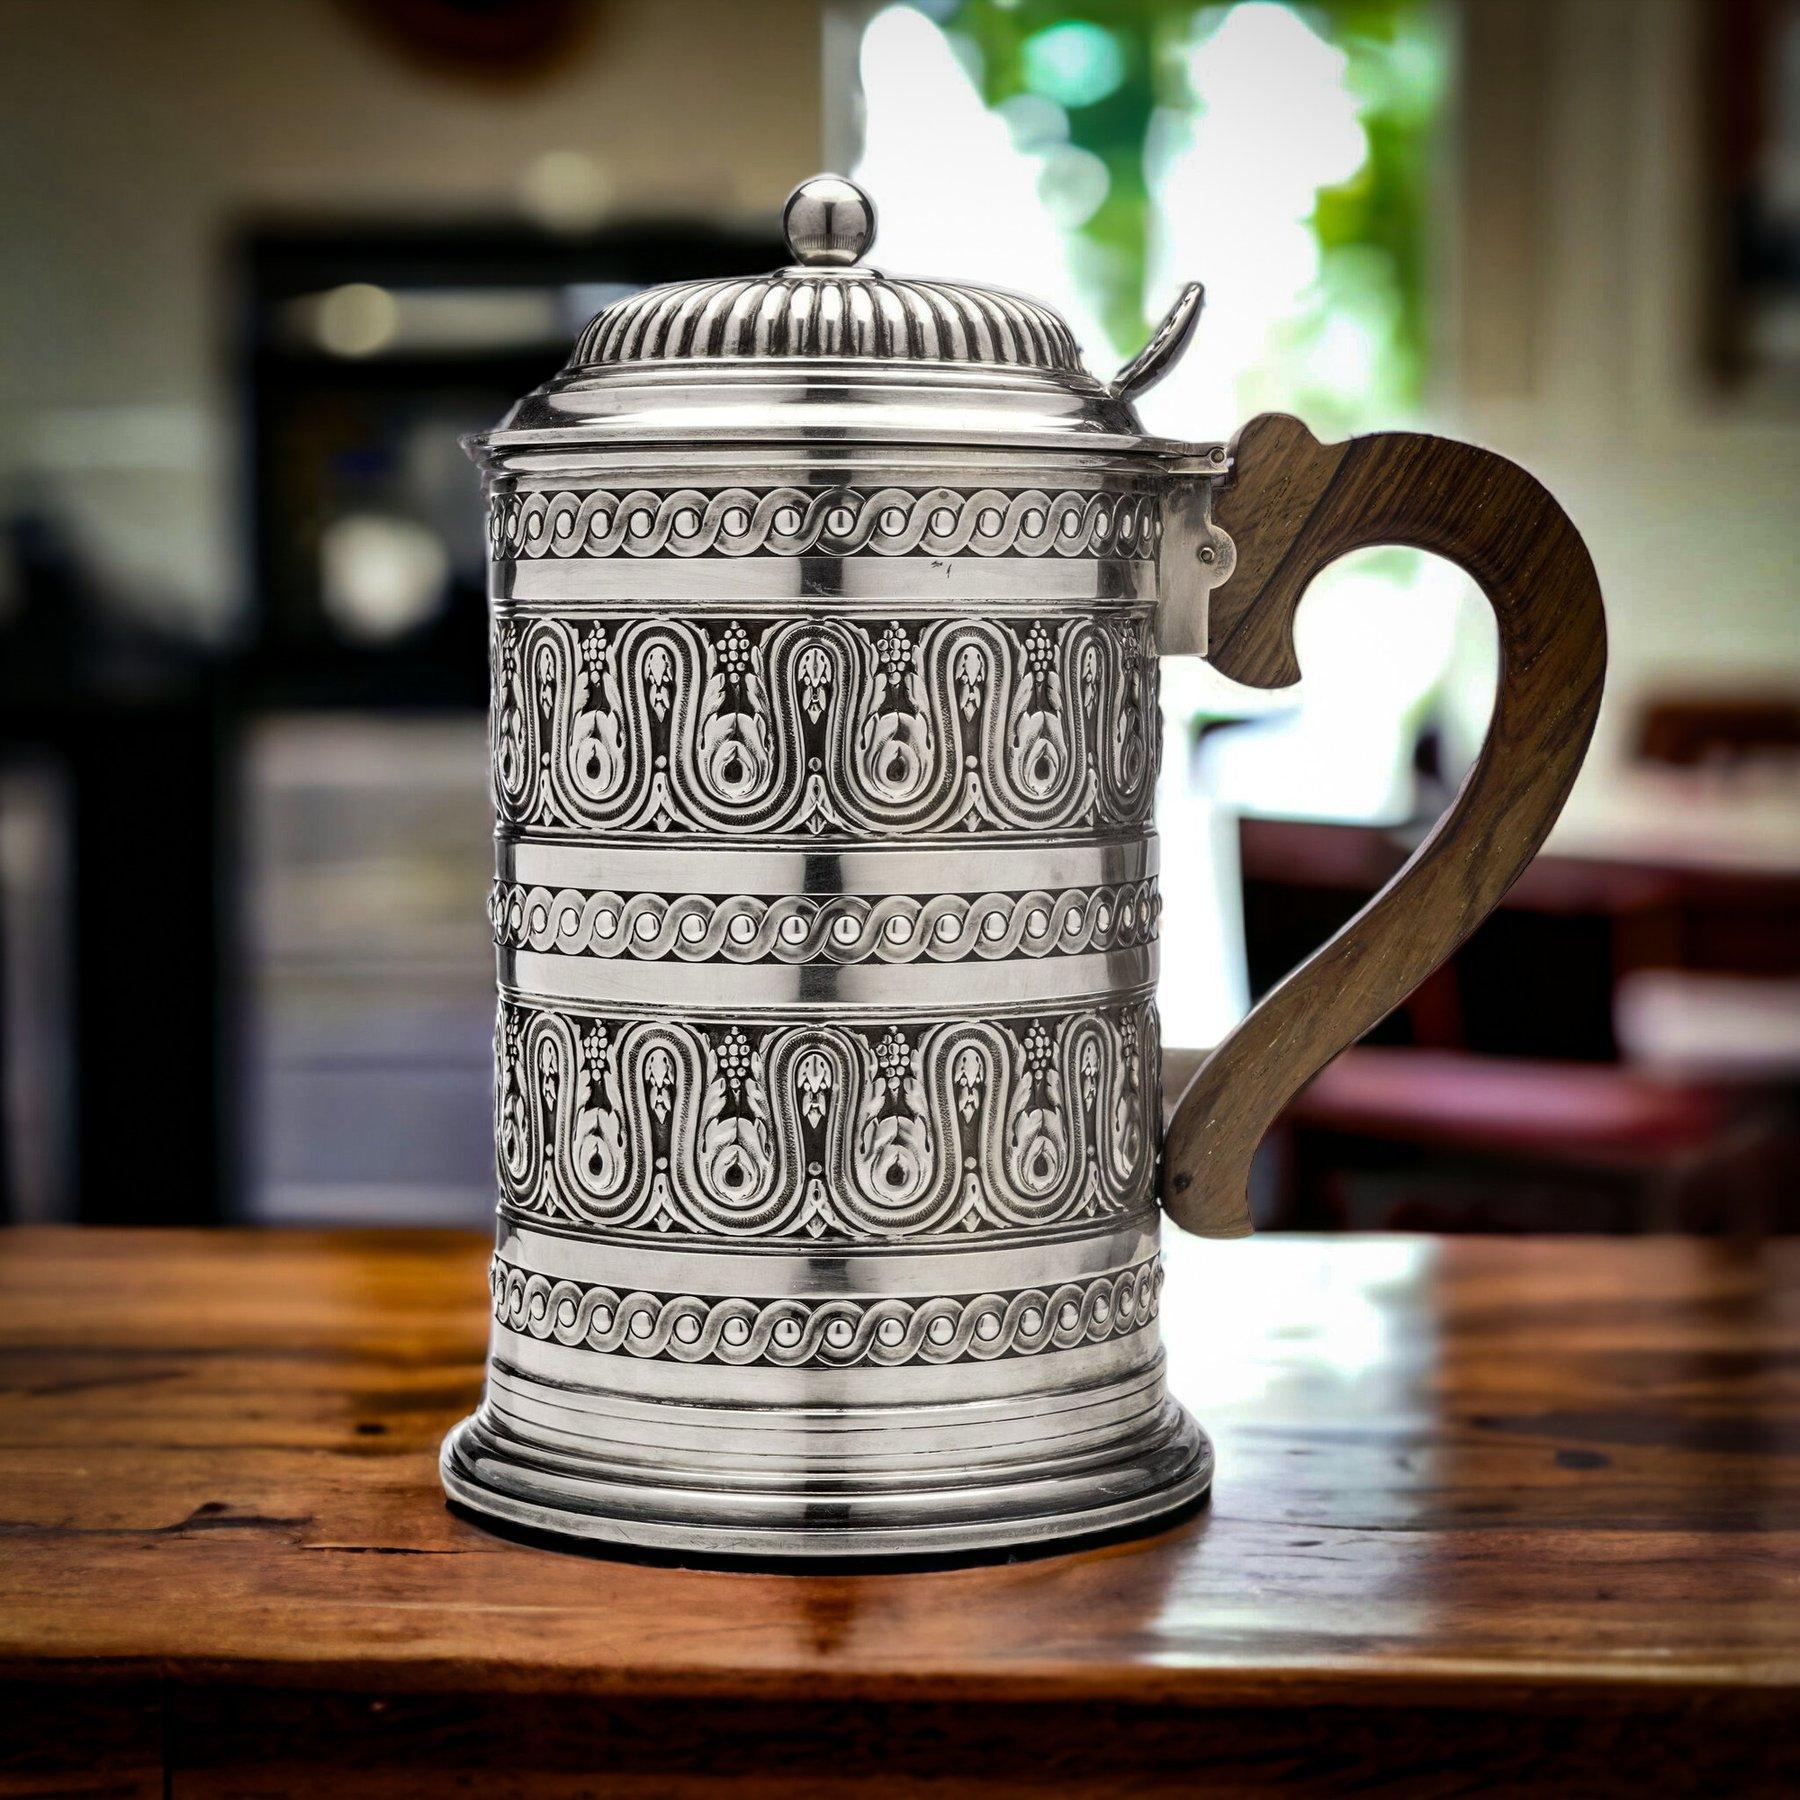 Antique highly ornate embossed 800. French silver tankard by Tétard Frères.
Made in France, circa 1910s
Fully hallmarked with maker's mark on base and Minerva 800. silver hallmark on upper rim.

The dimensions:
Diameter x height: 12 x 20